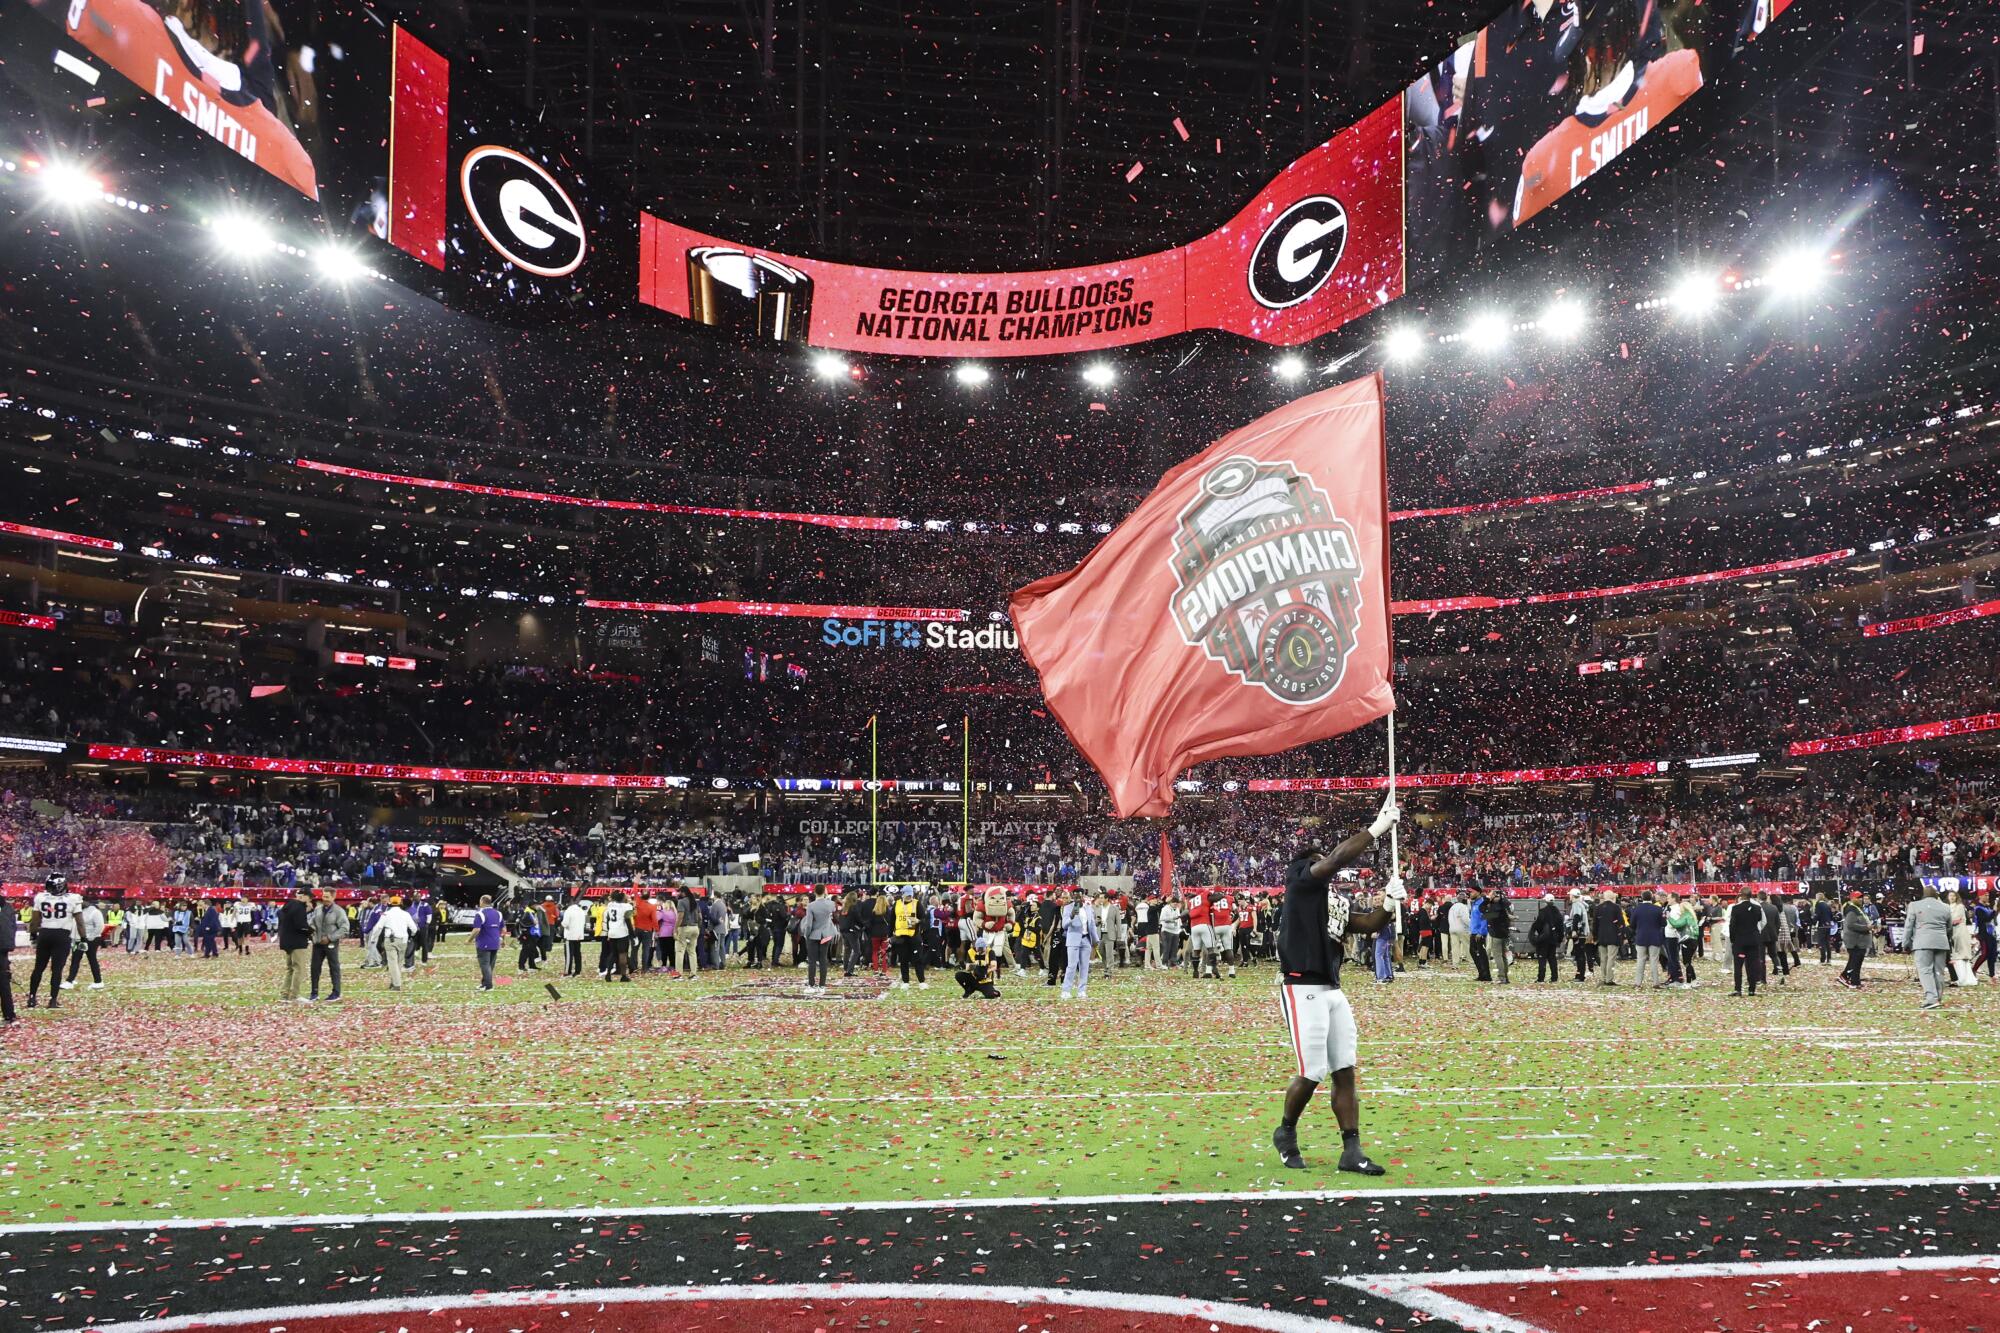 Georgia players and fans celebrate after defeating TCU 65-7 in the college football national championship game.